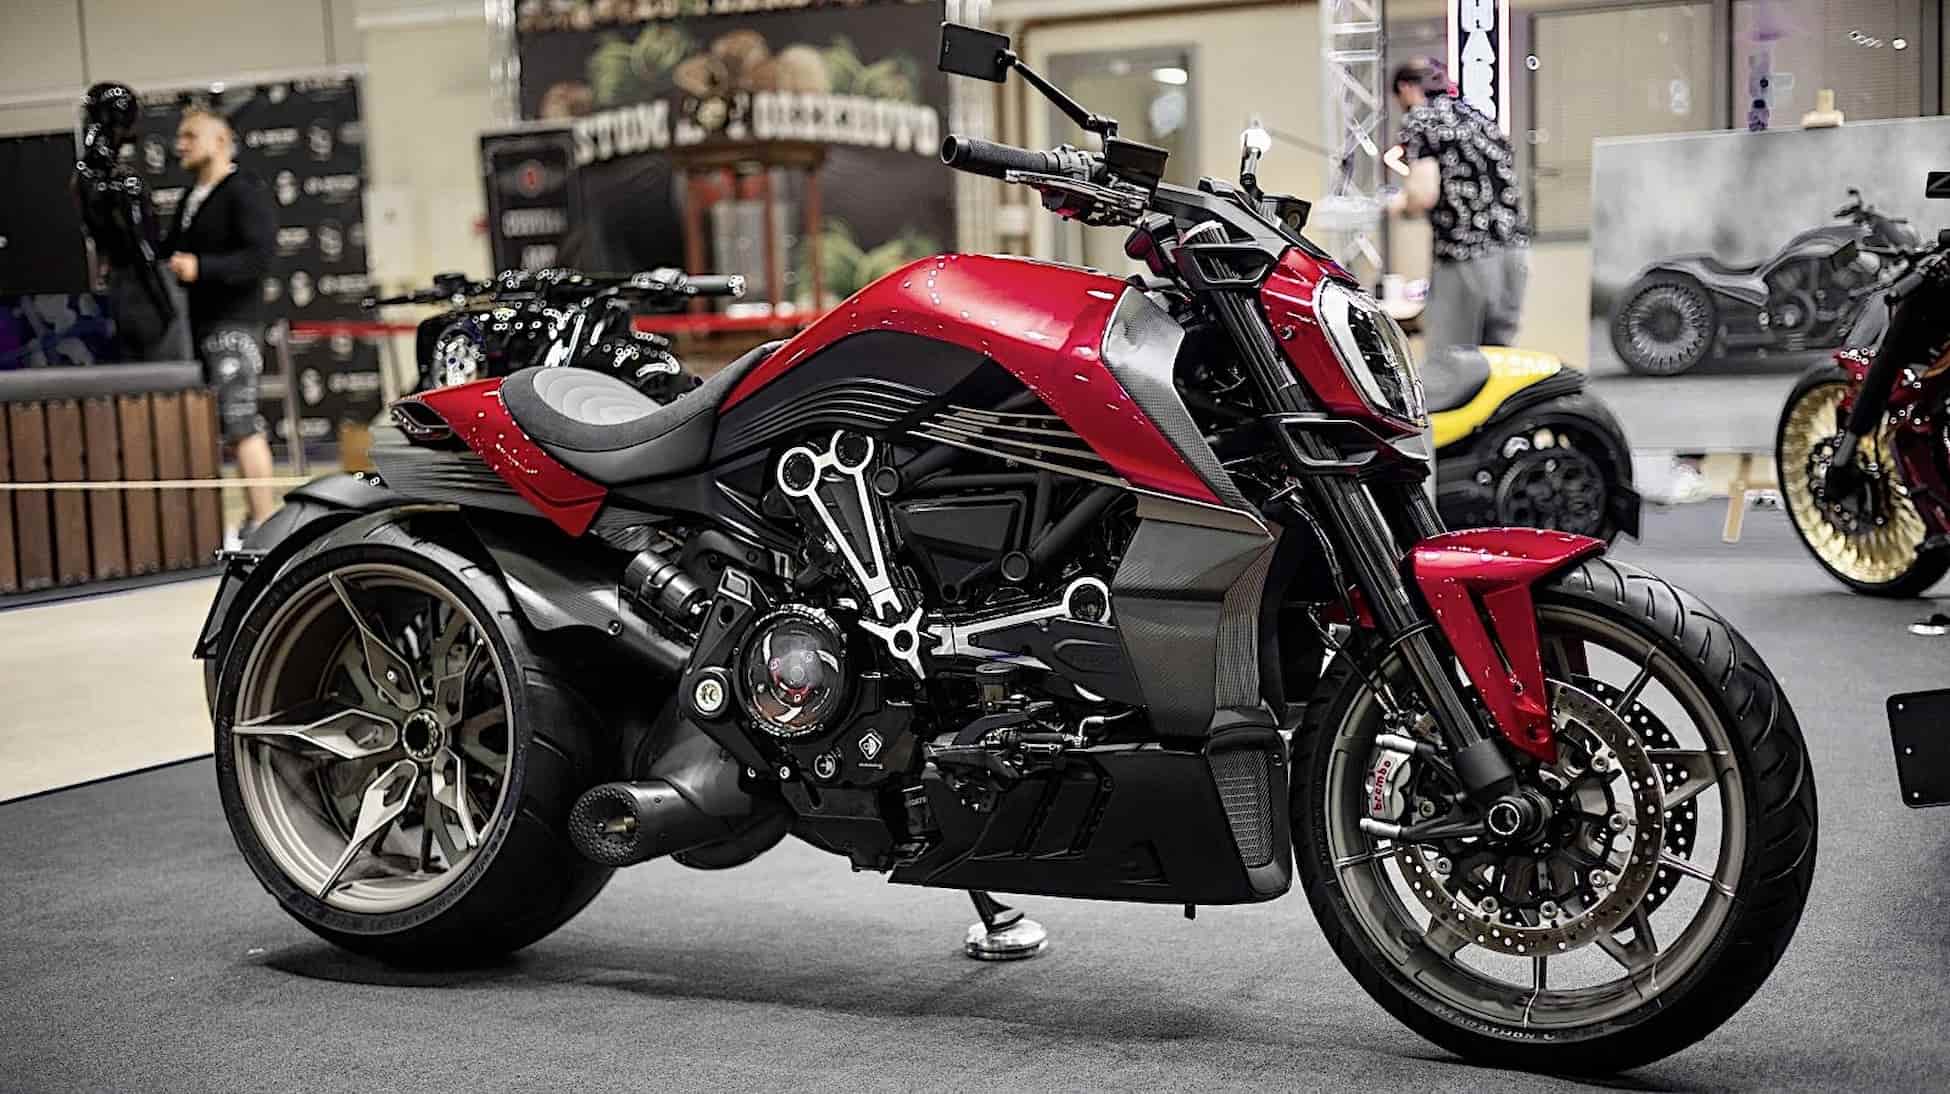 russians used to mold harley davidsons turn ducati xdiavel into some kind of beast 6